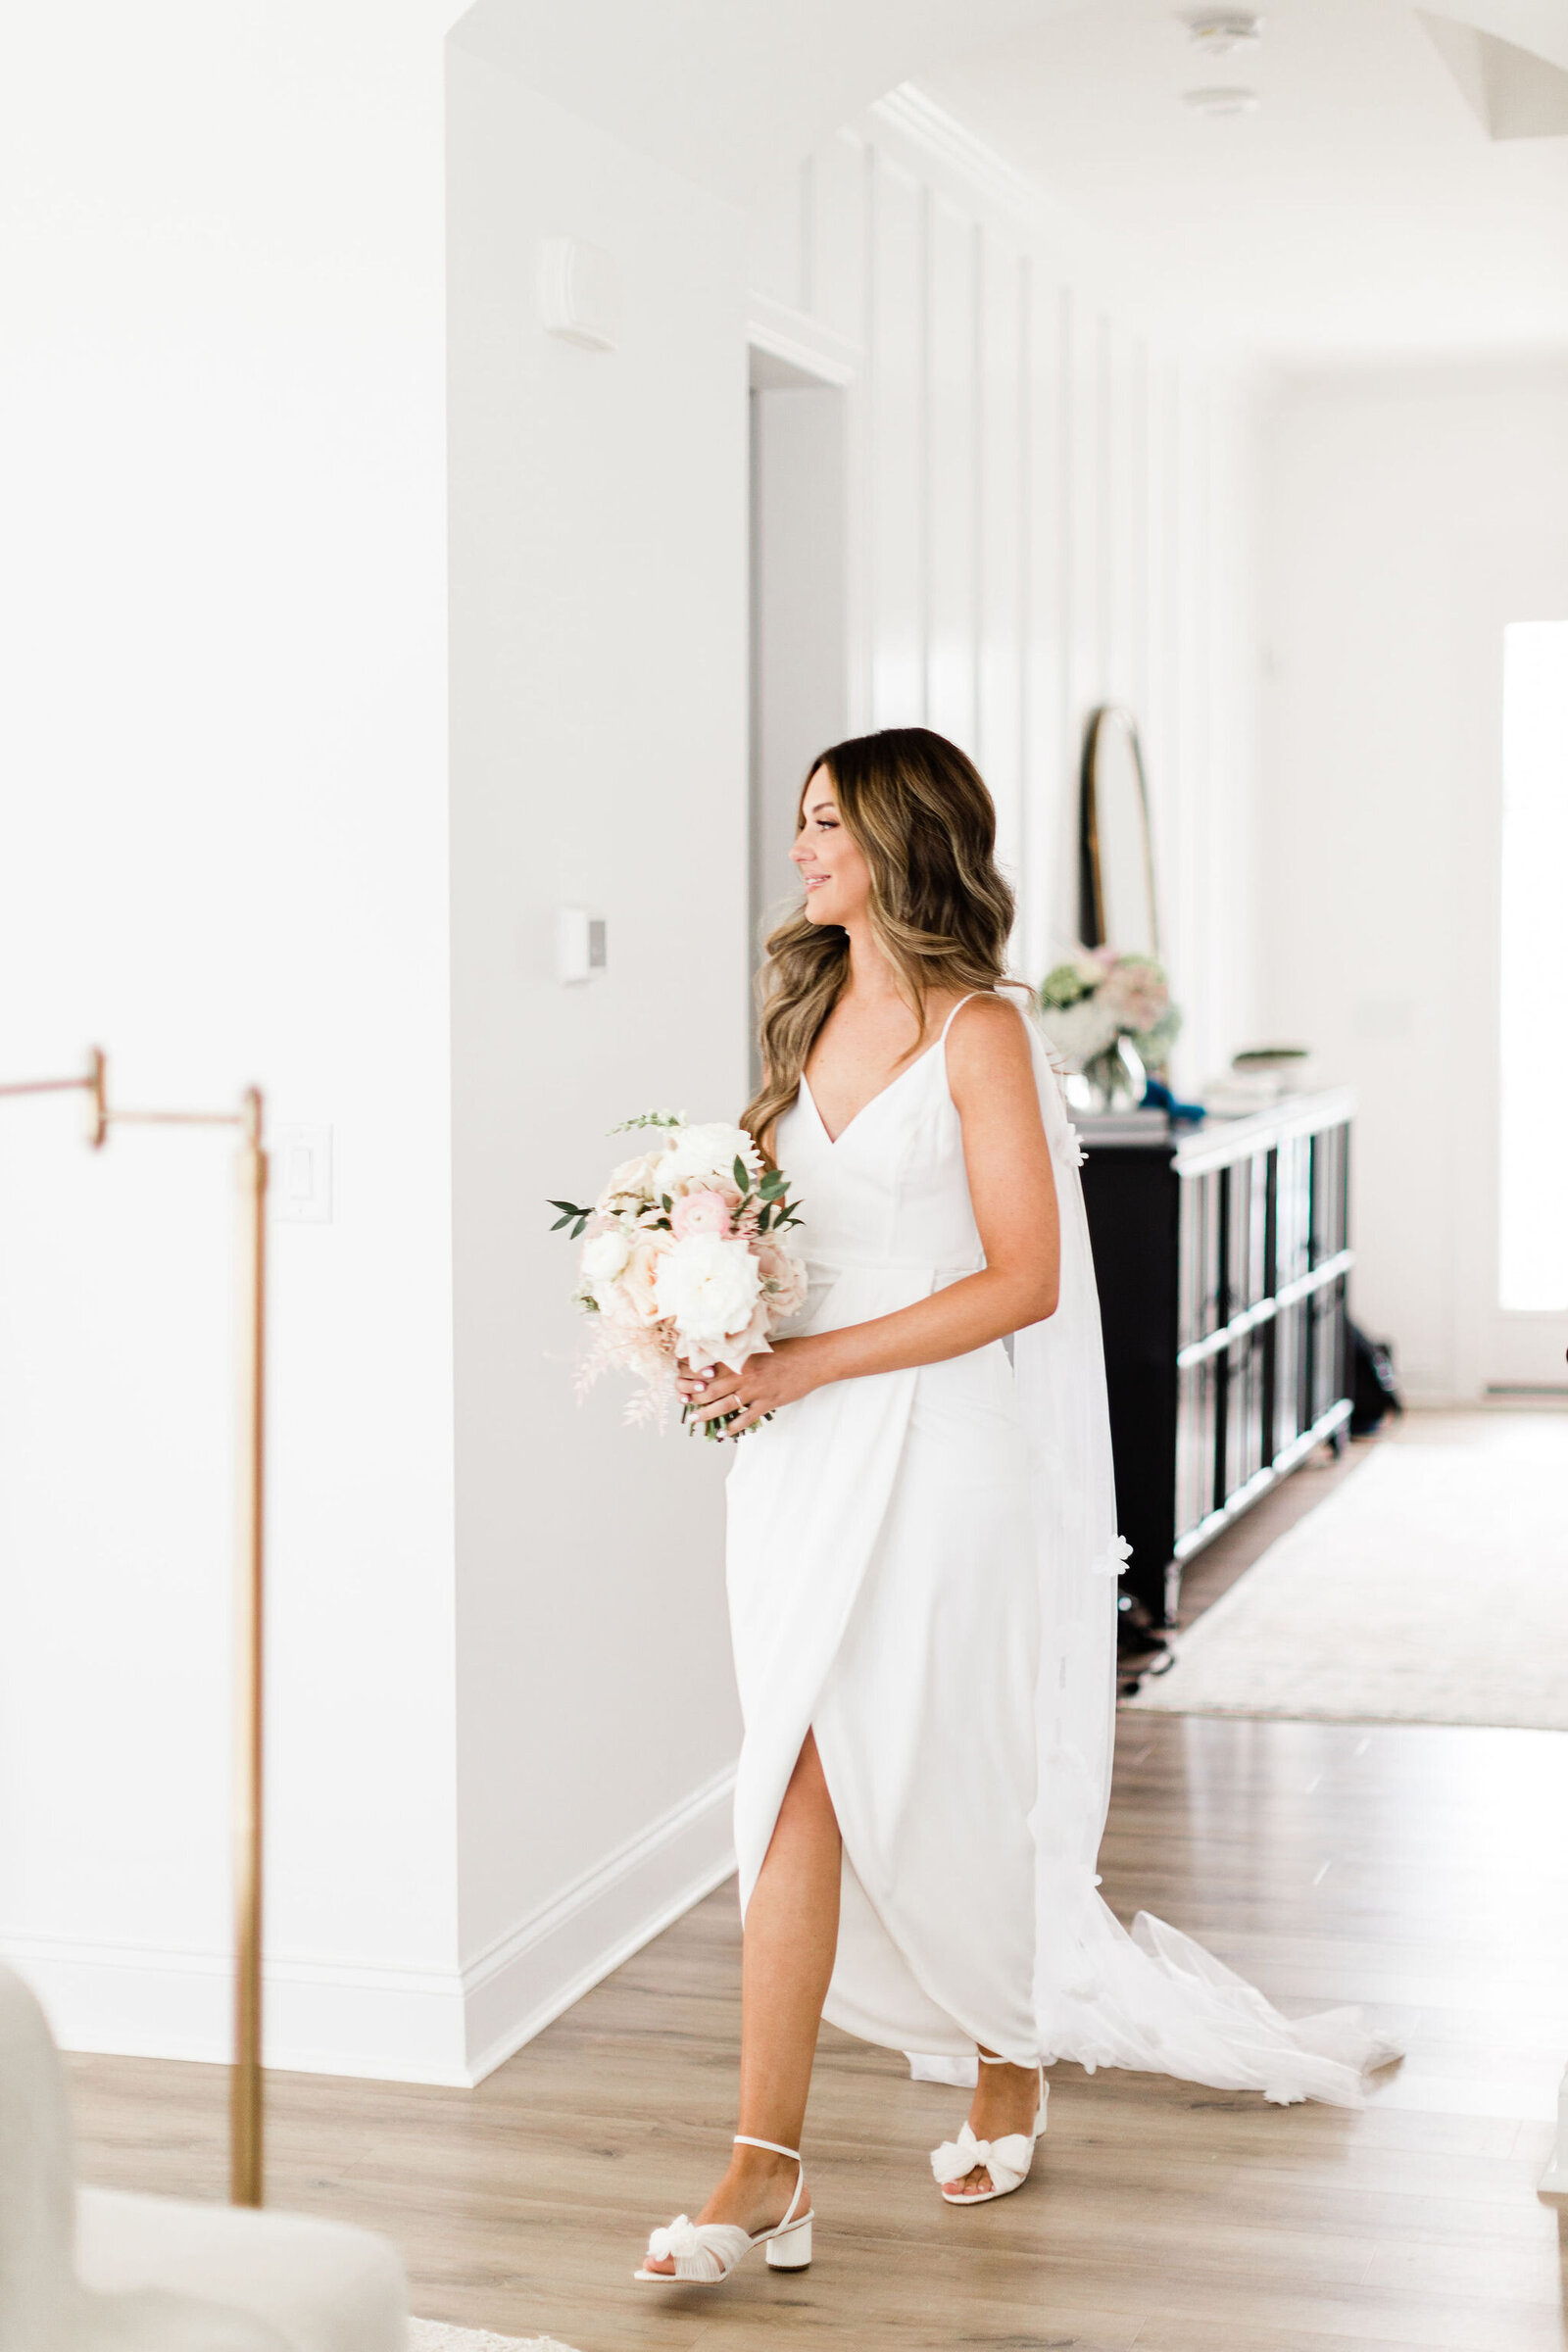 Bride Getting Ready for her Wedding | Raleigh NC | The Axtells Photo and Film